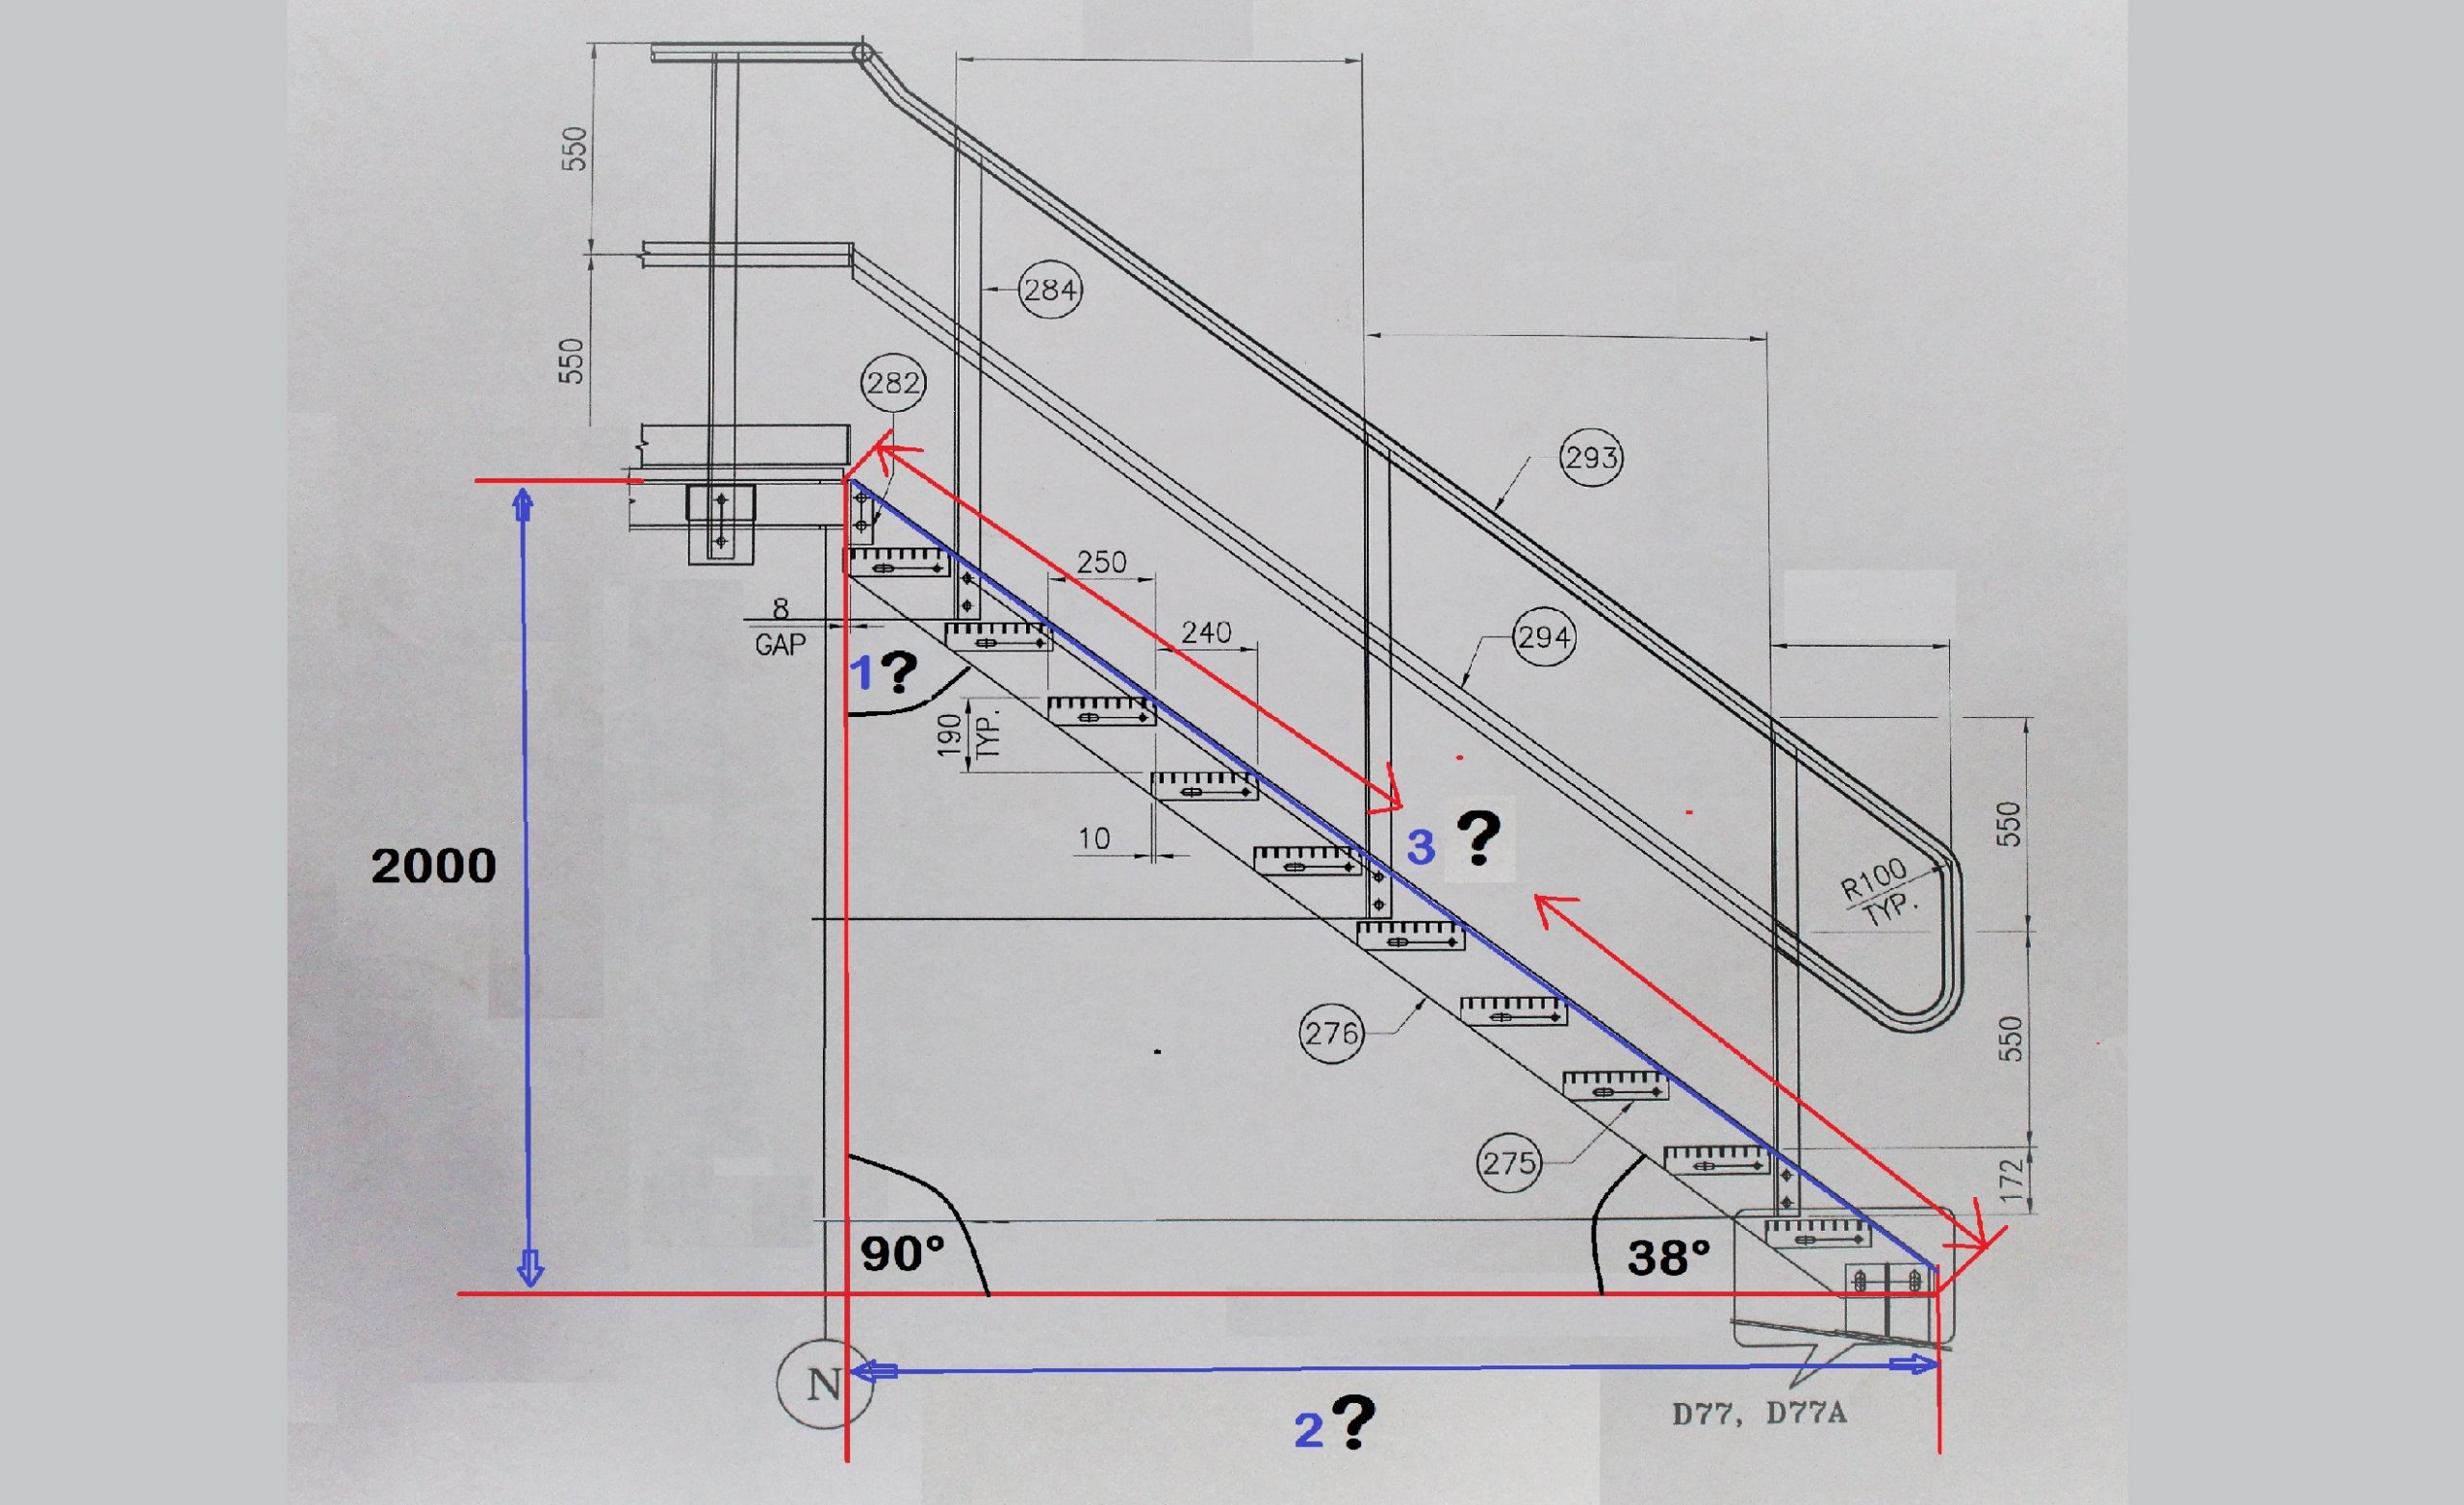 Staircase degree calculation formula/structure steel fitter training